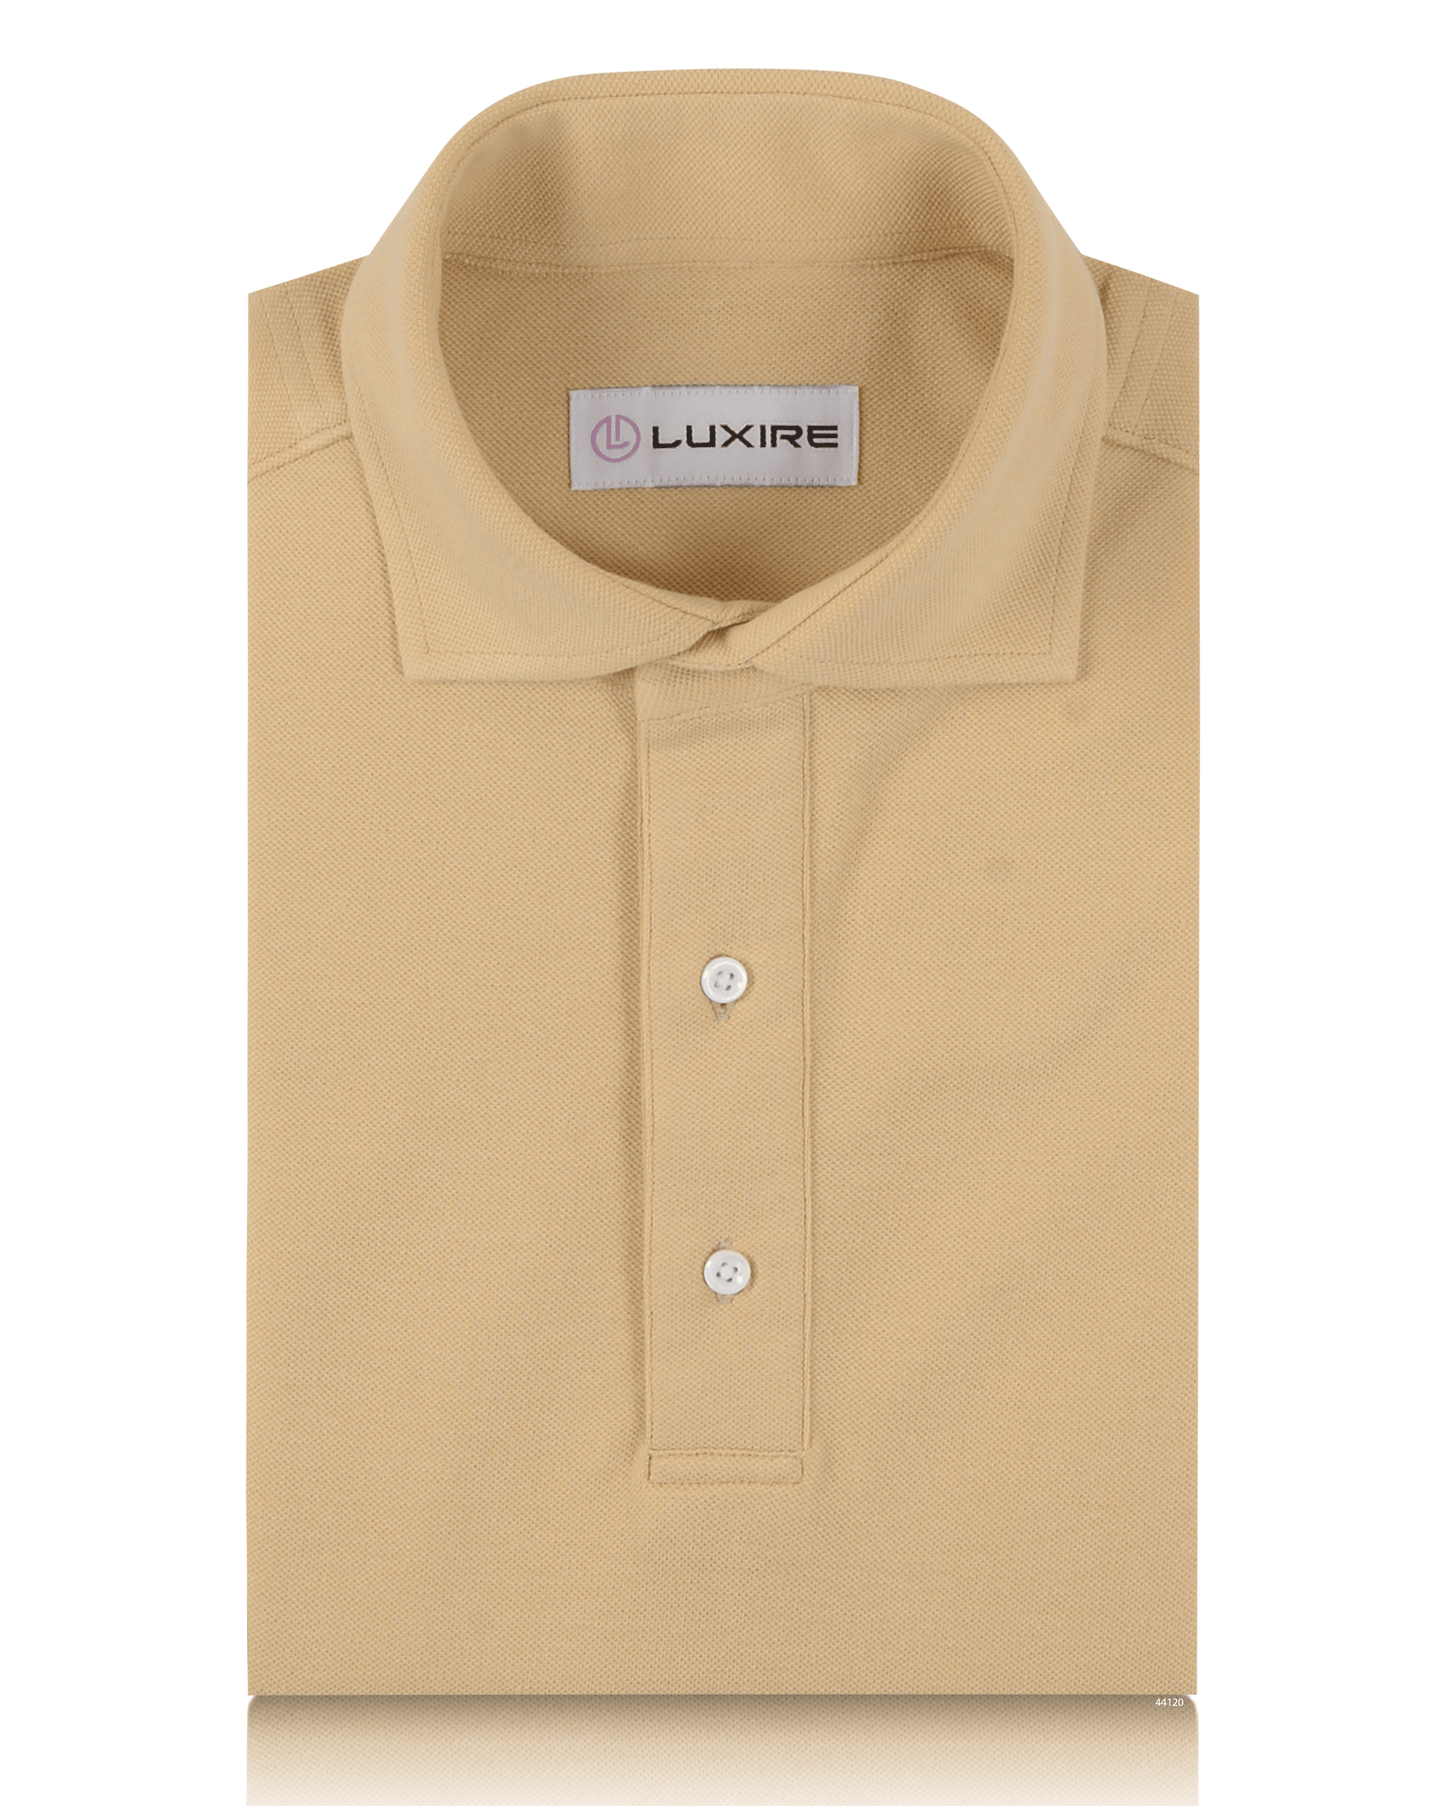 Front of the custom oxford polo shirt for men by Luxire in light sand